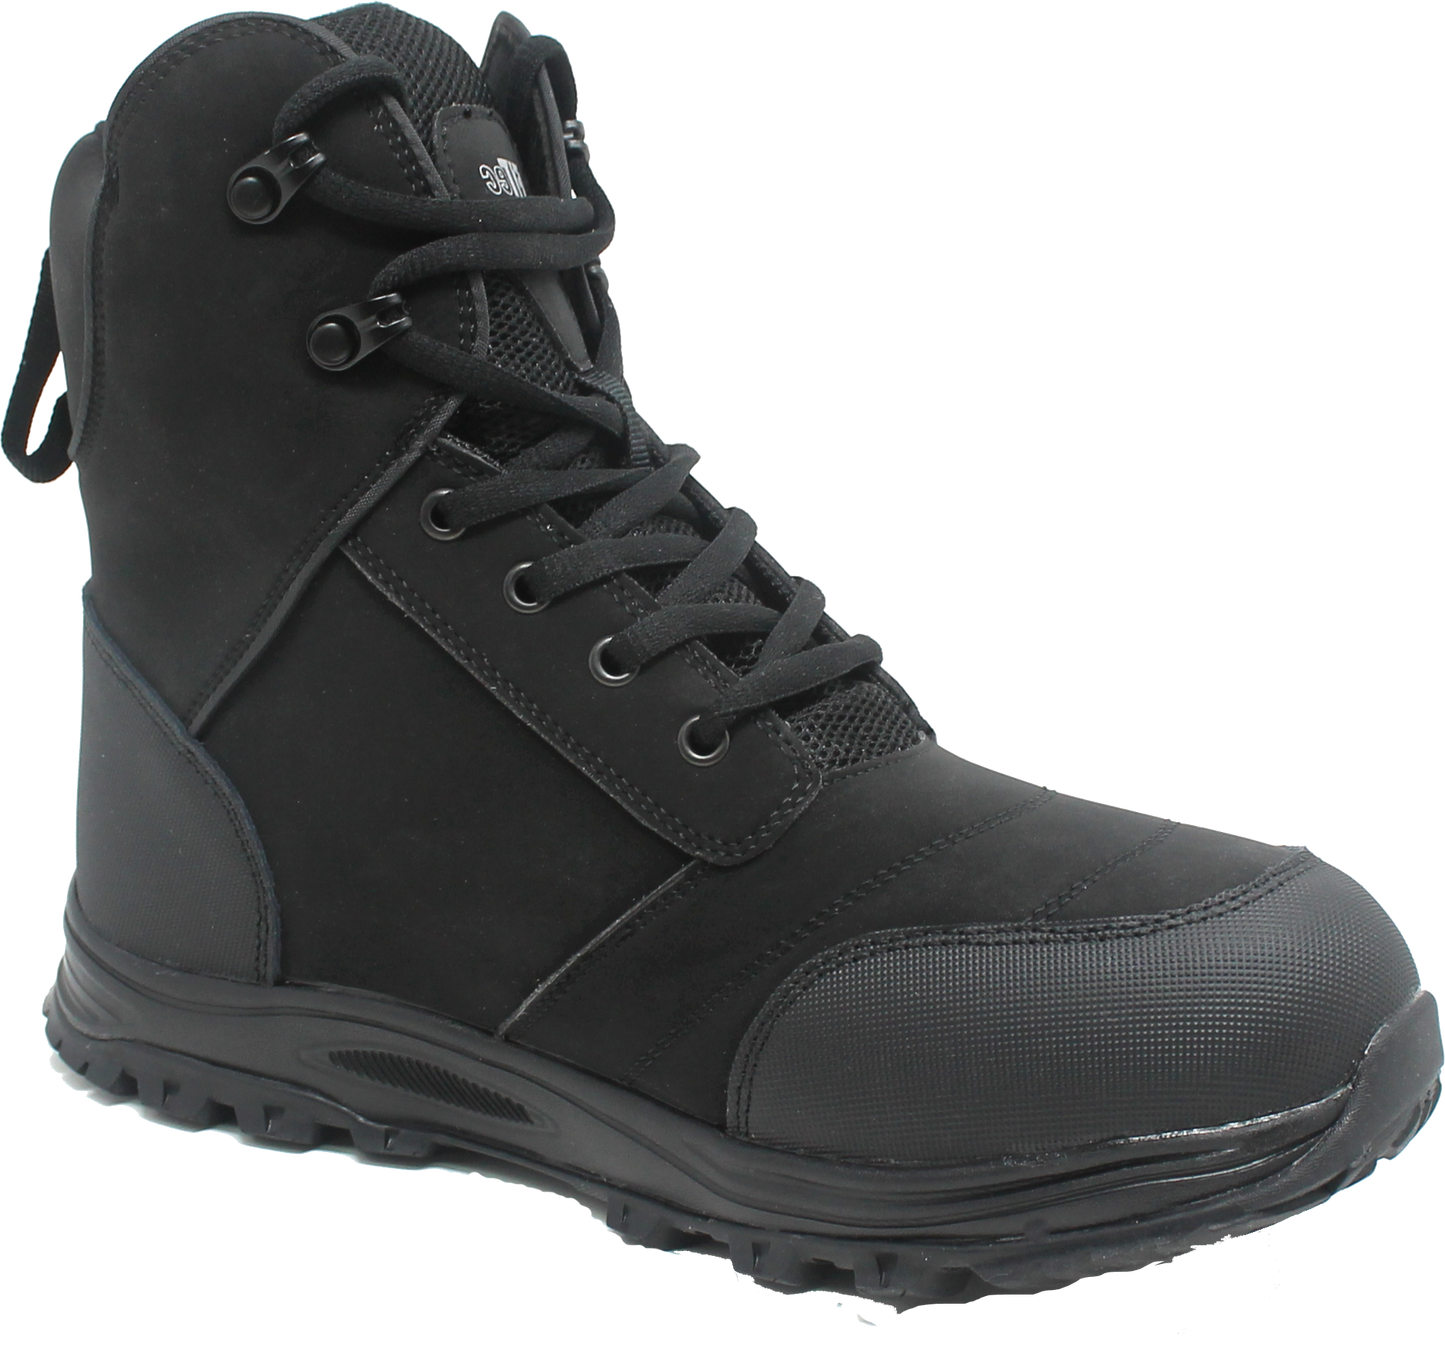 Fitec 9317-Black Lady's Extra Depth Winter Boots 200G Insulation